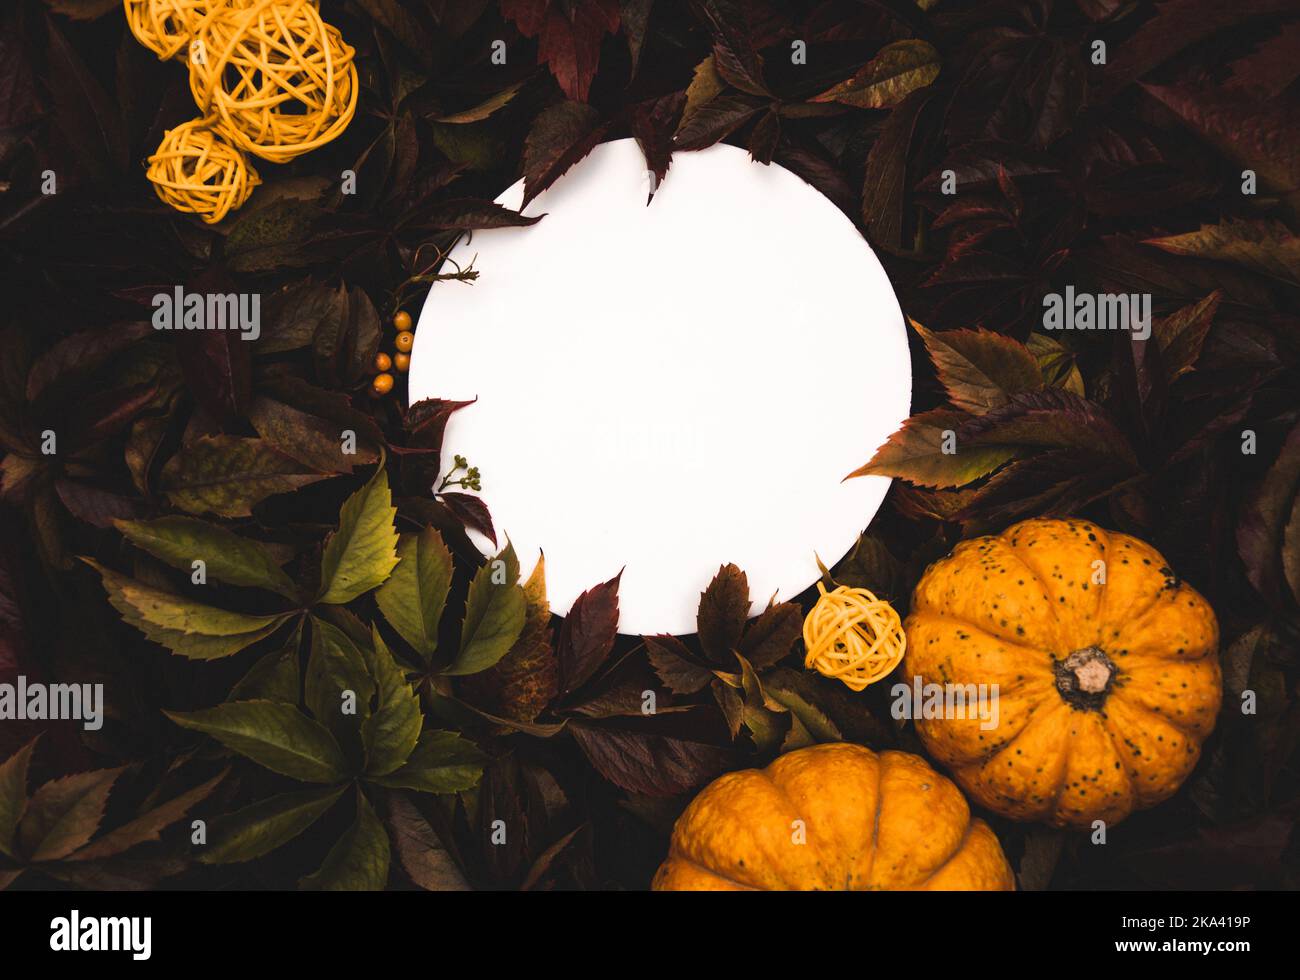 Horizontal flatlay white round copyspace on foliage background. Сircle framed by leaves pumpkins and stylized balls - for logo, text. Stock Photo